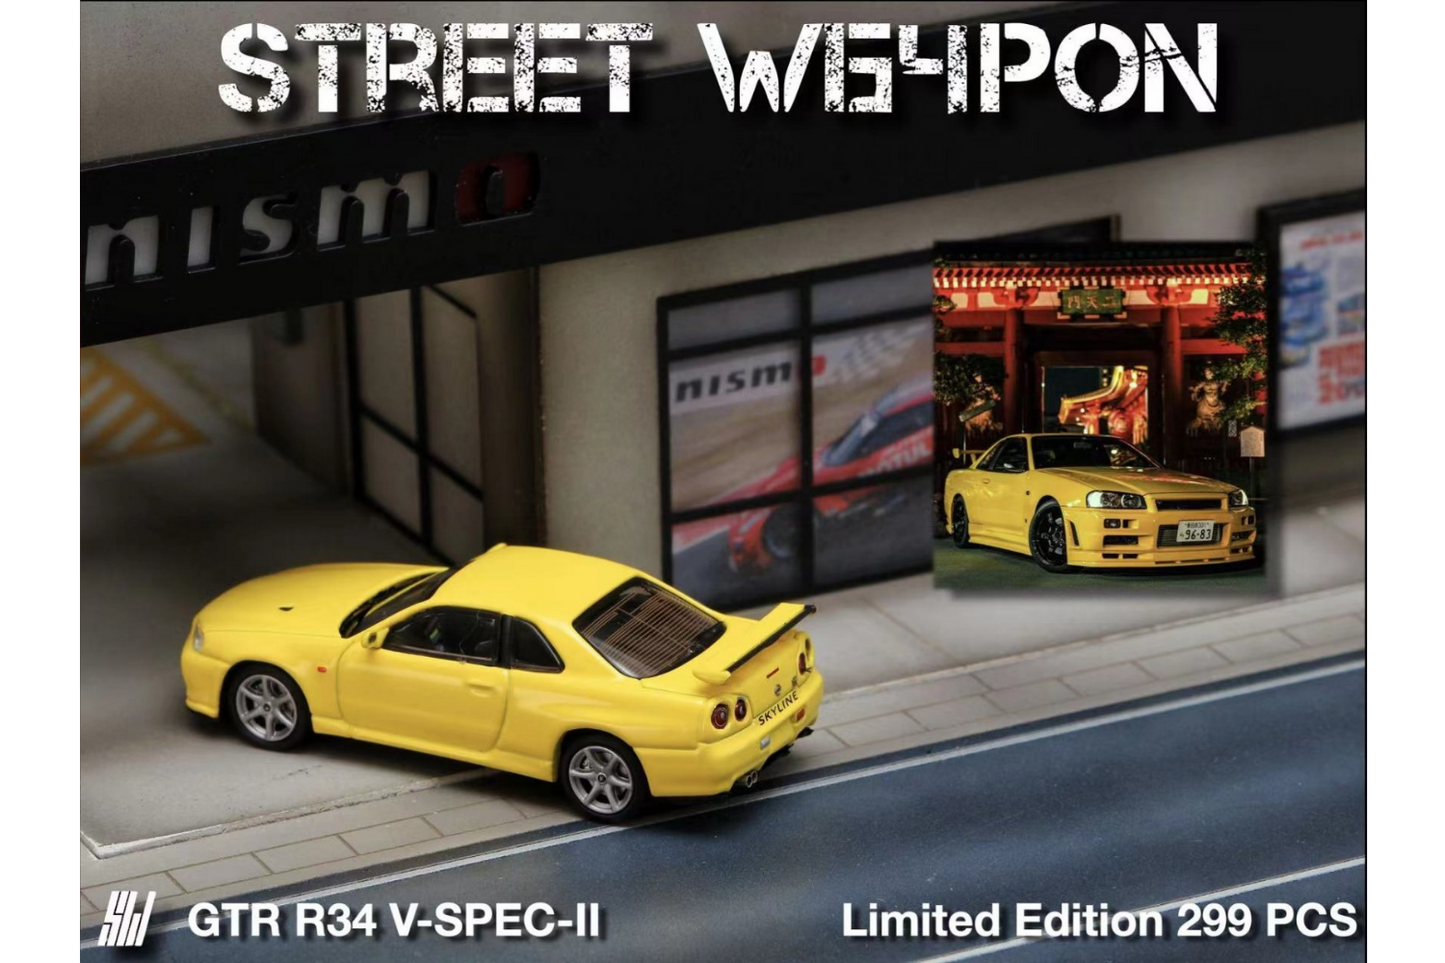 Street Weapon 1/64 Honda Civic EG6 in Knuckles Livery - Nissan Skyline GT-R (R34) V-Spec II in Yellow